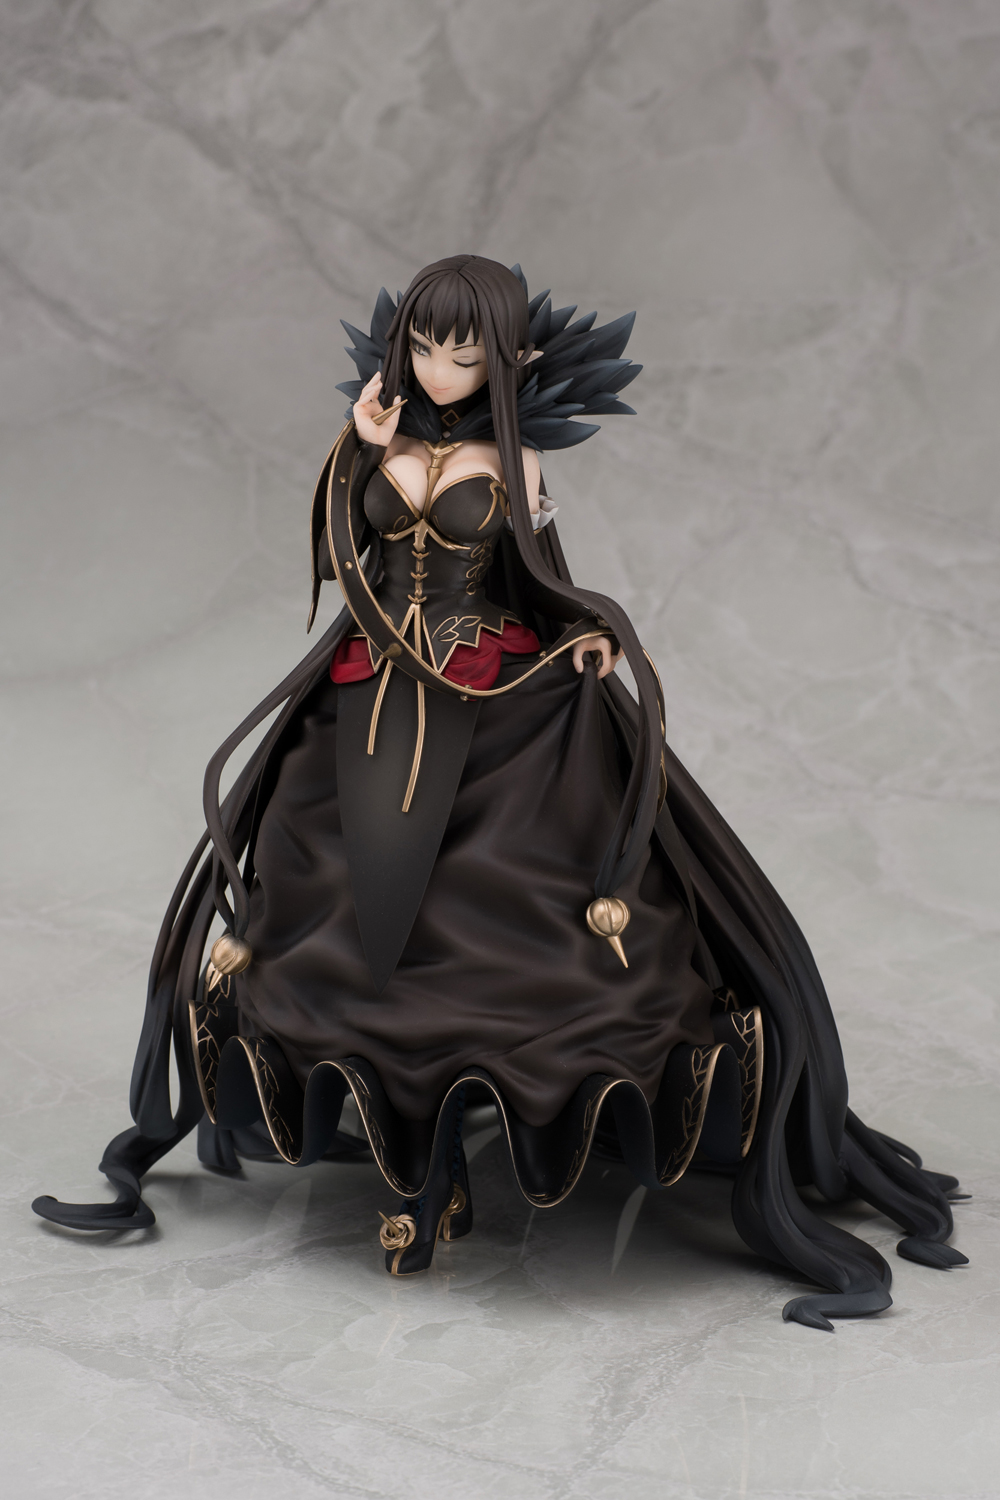 1/8 Fate/Apocrypha Assassin of 